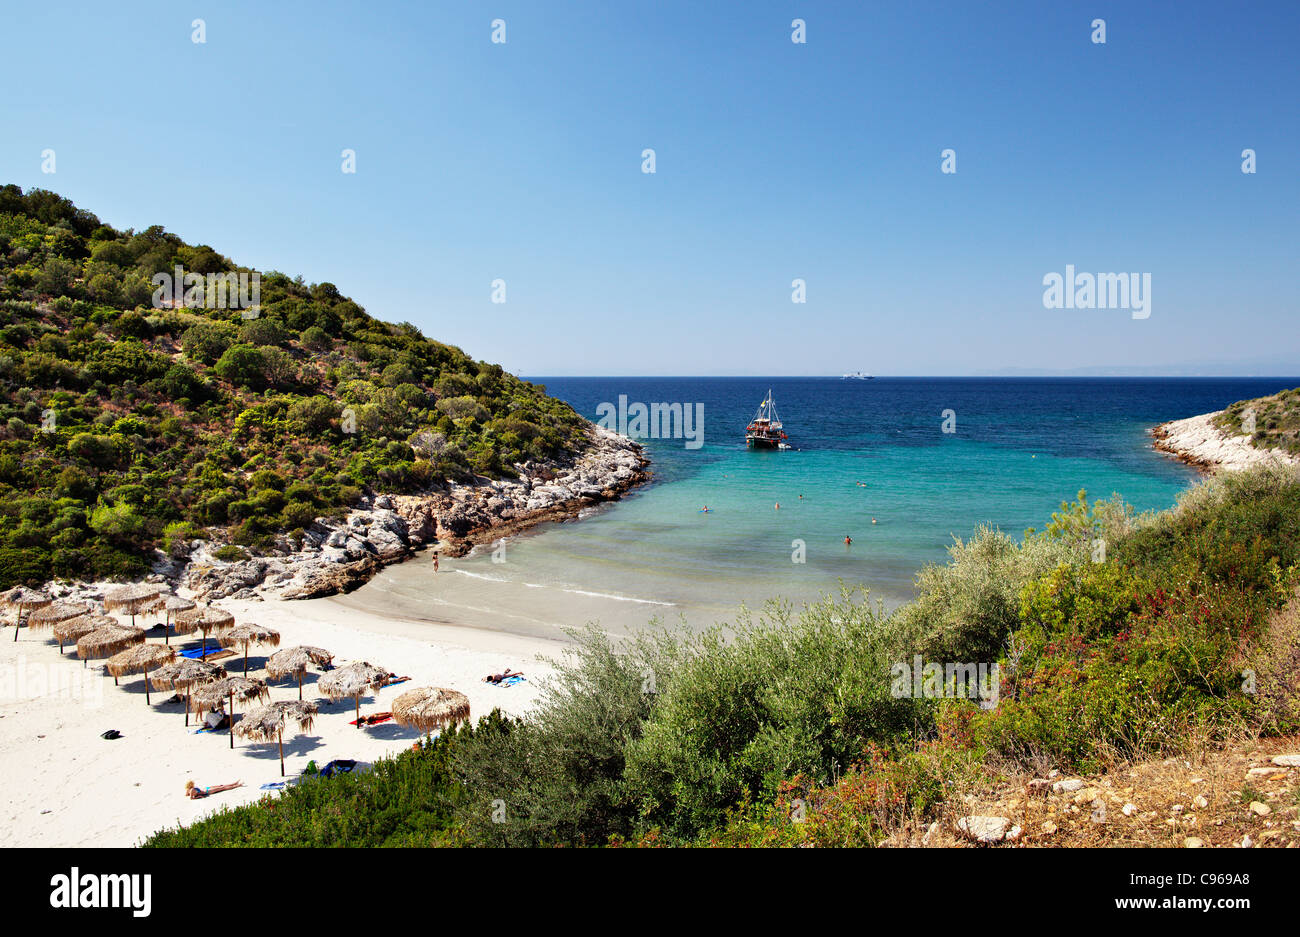 One of many paradise beaches in Thassos island, Greece. Stock Photo